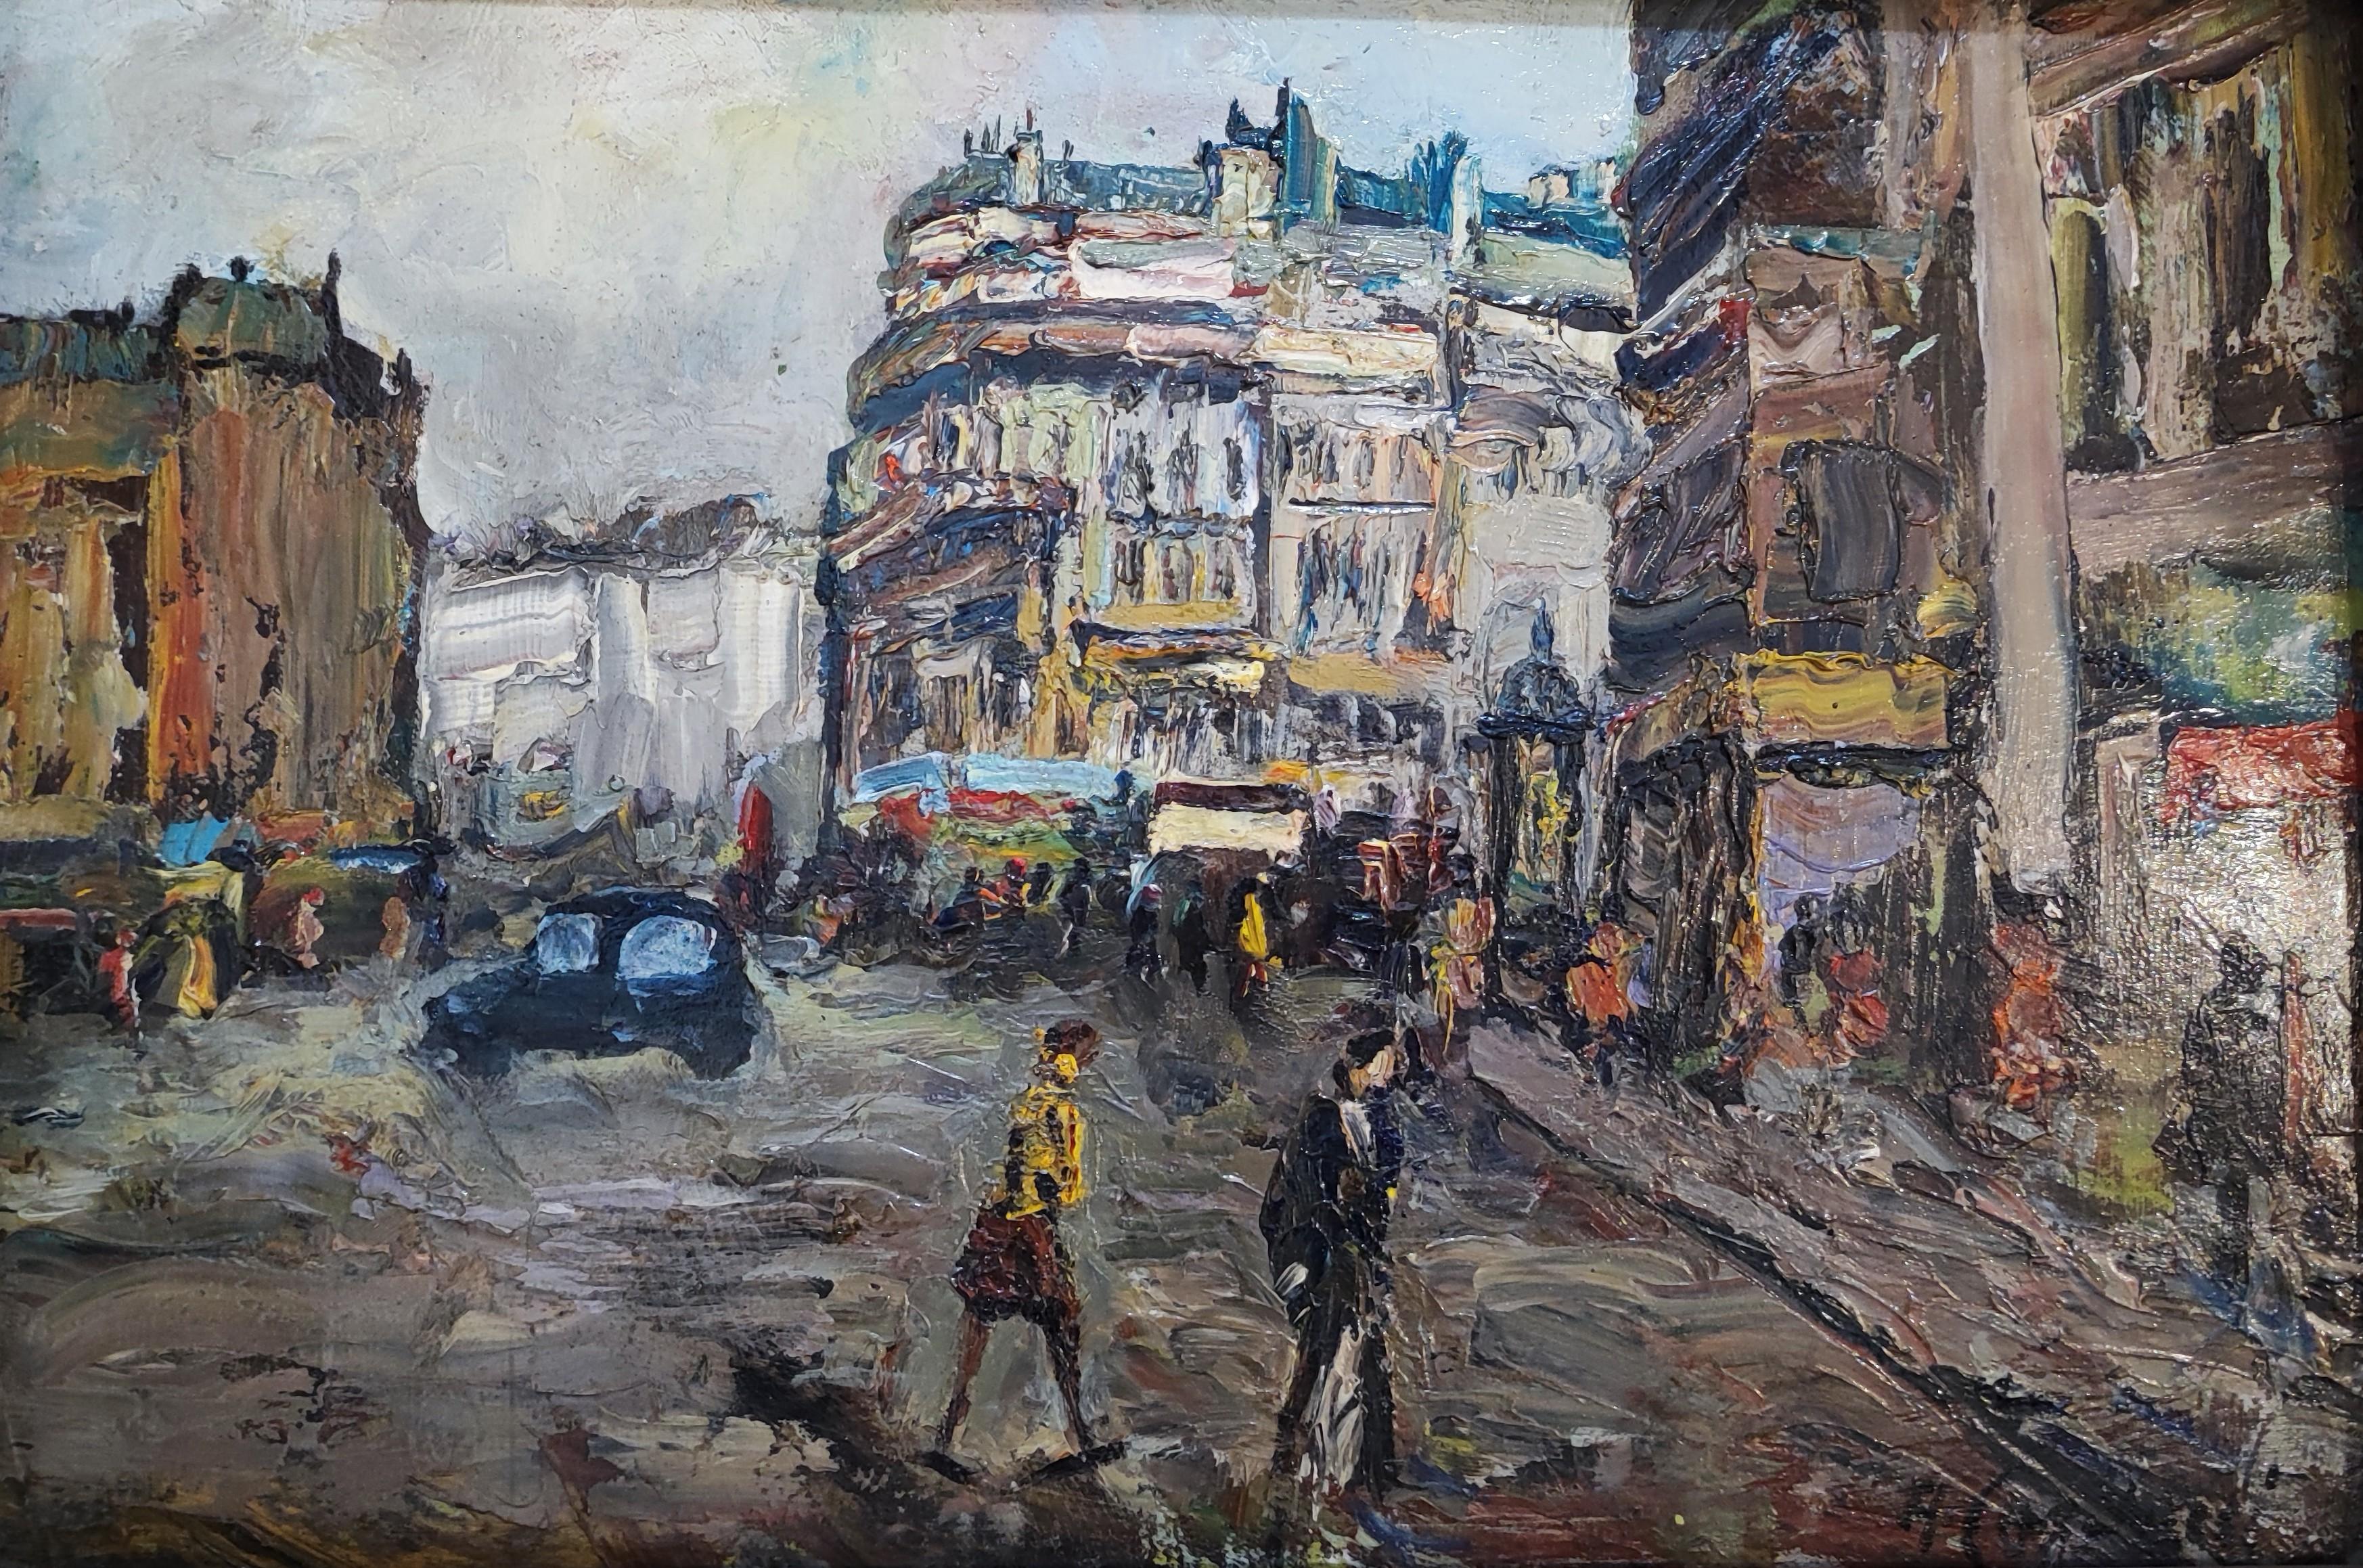 Downtown - Gray Landscape Painting by Adolfo Carducci